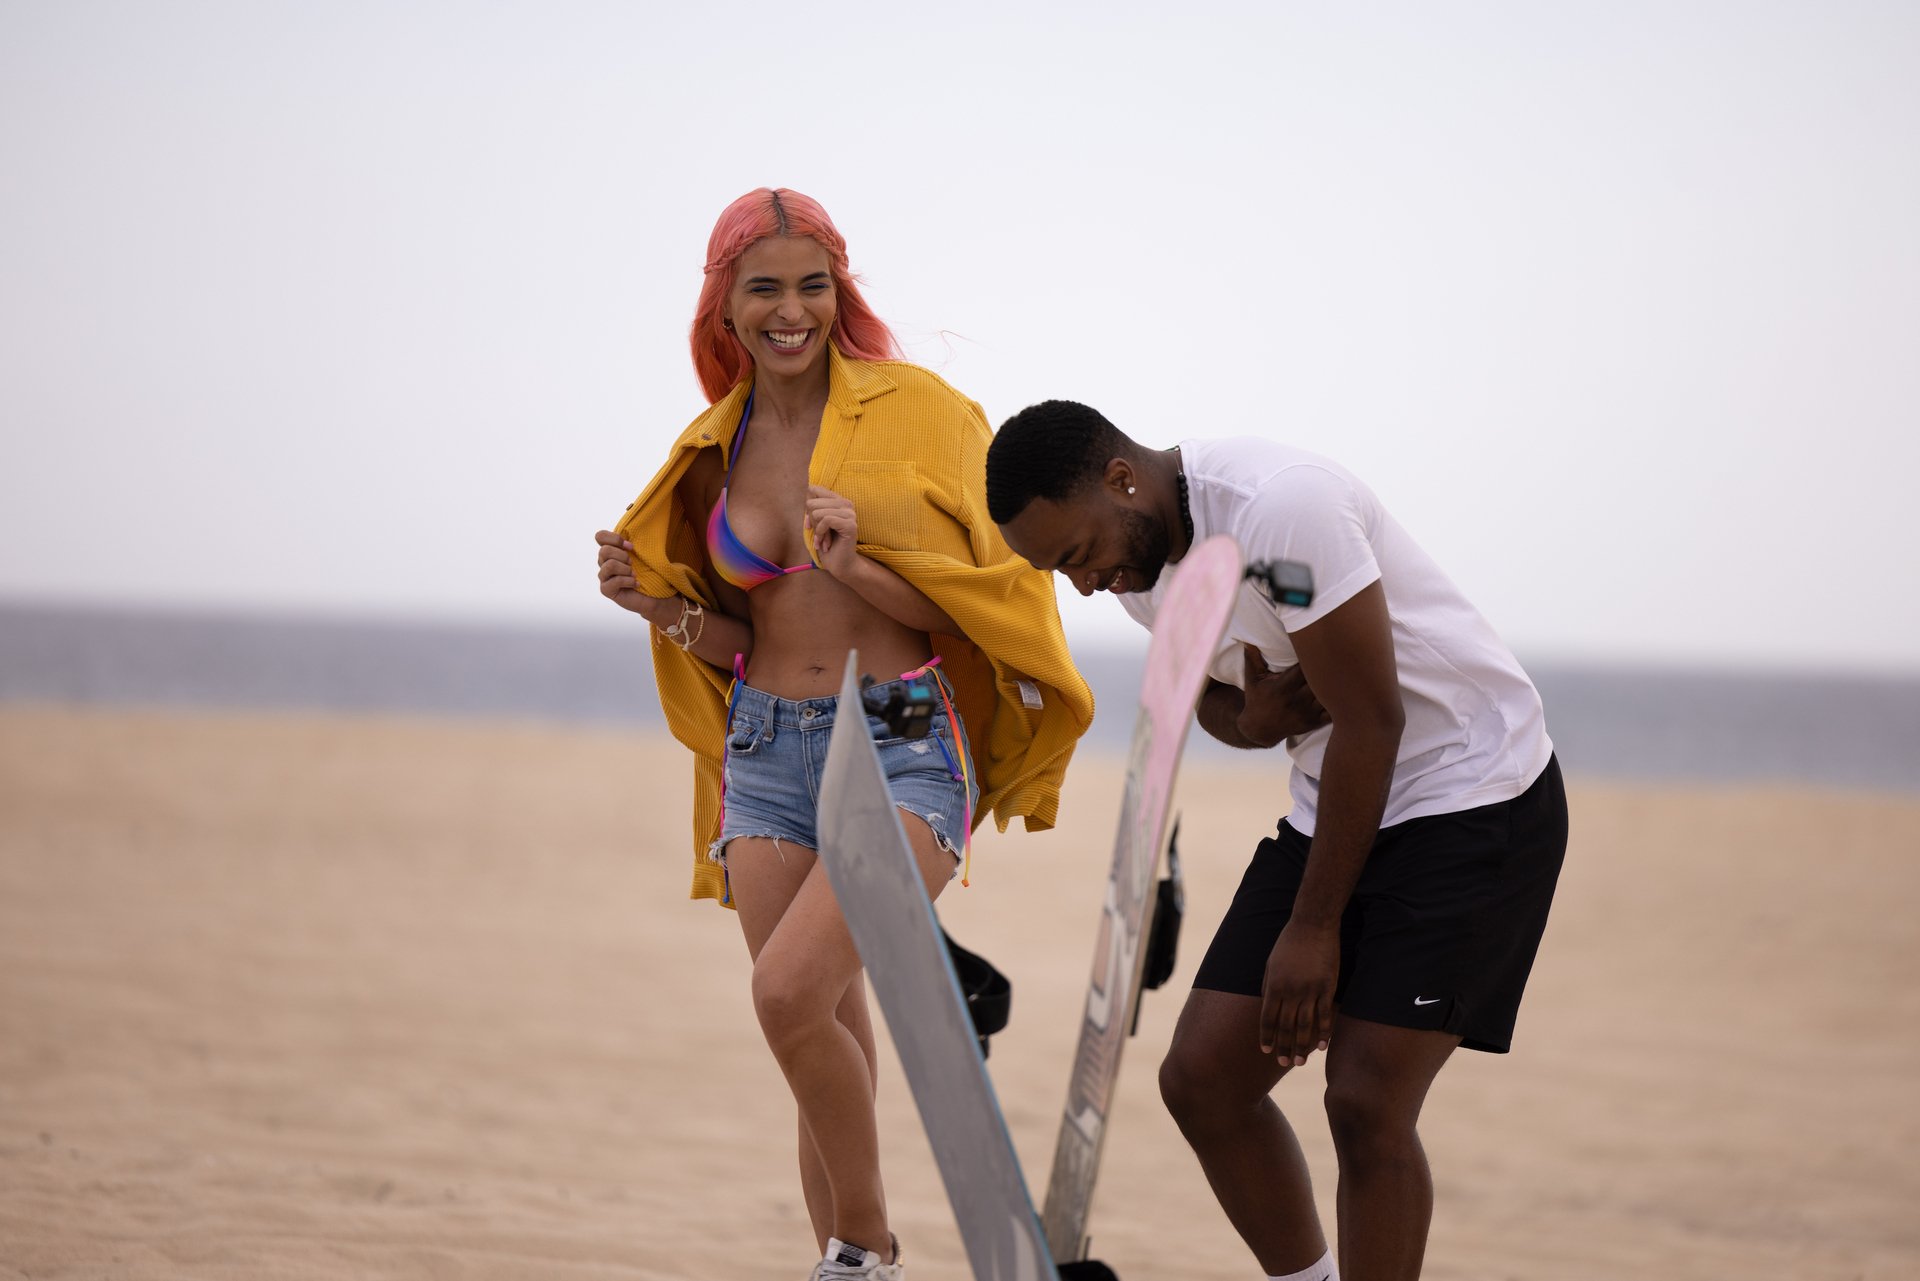 'FBoy Island' Season 2 Tamaris Sepulveda and JaBriane Ross walking and laughing together on the beach